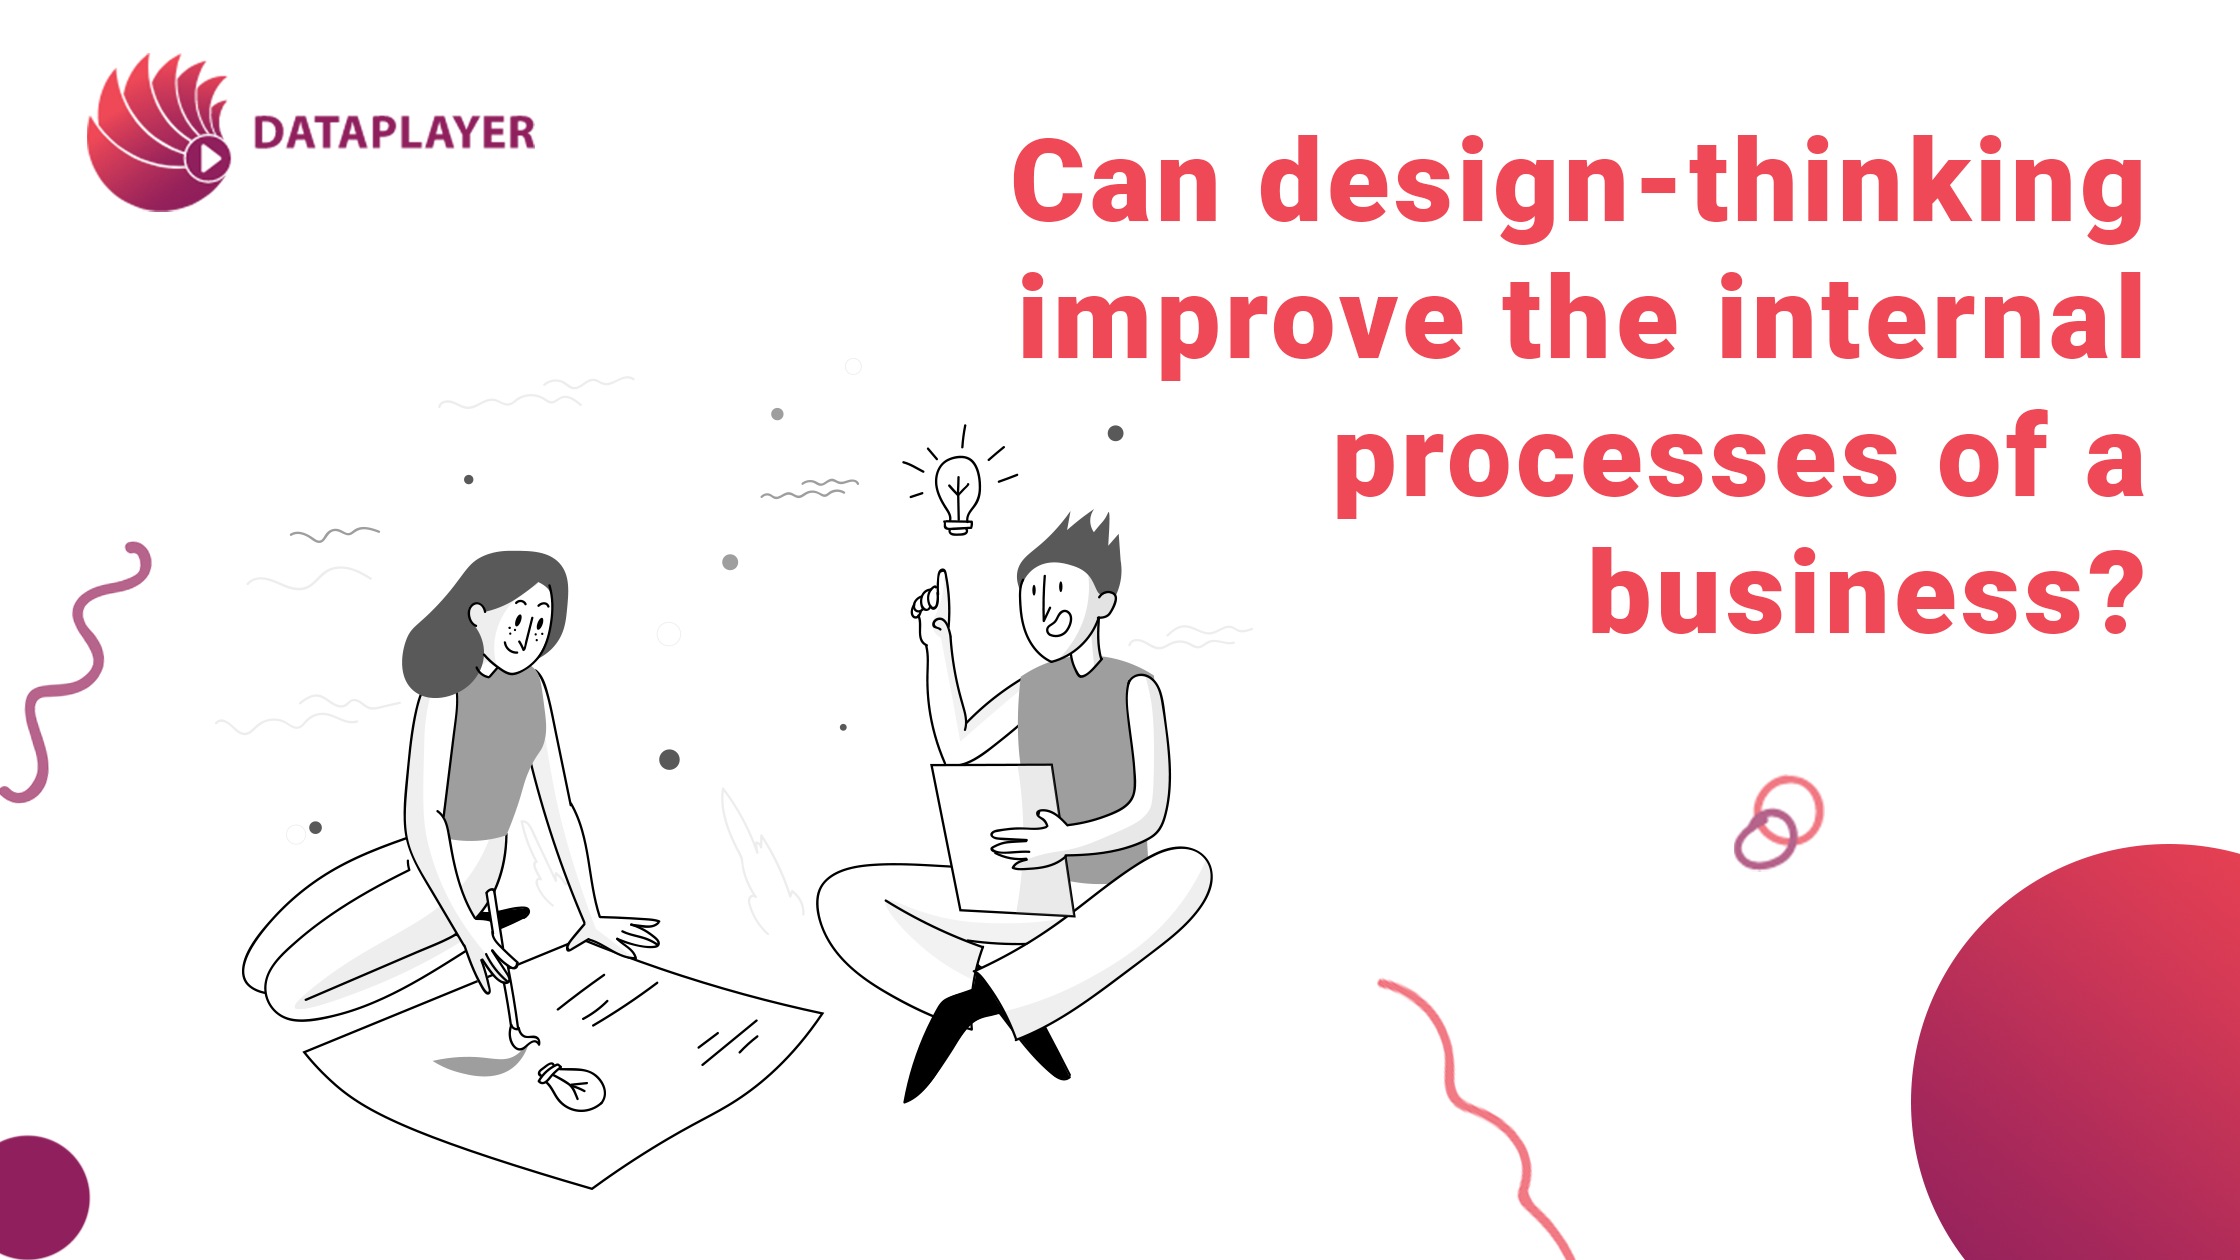 Can design-thinking improve the internal processes of a business?